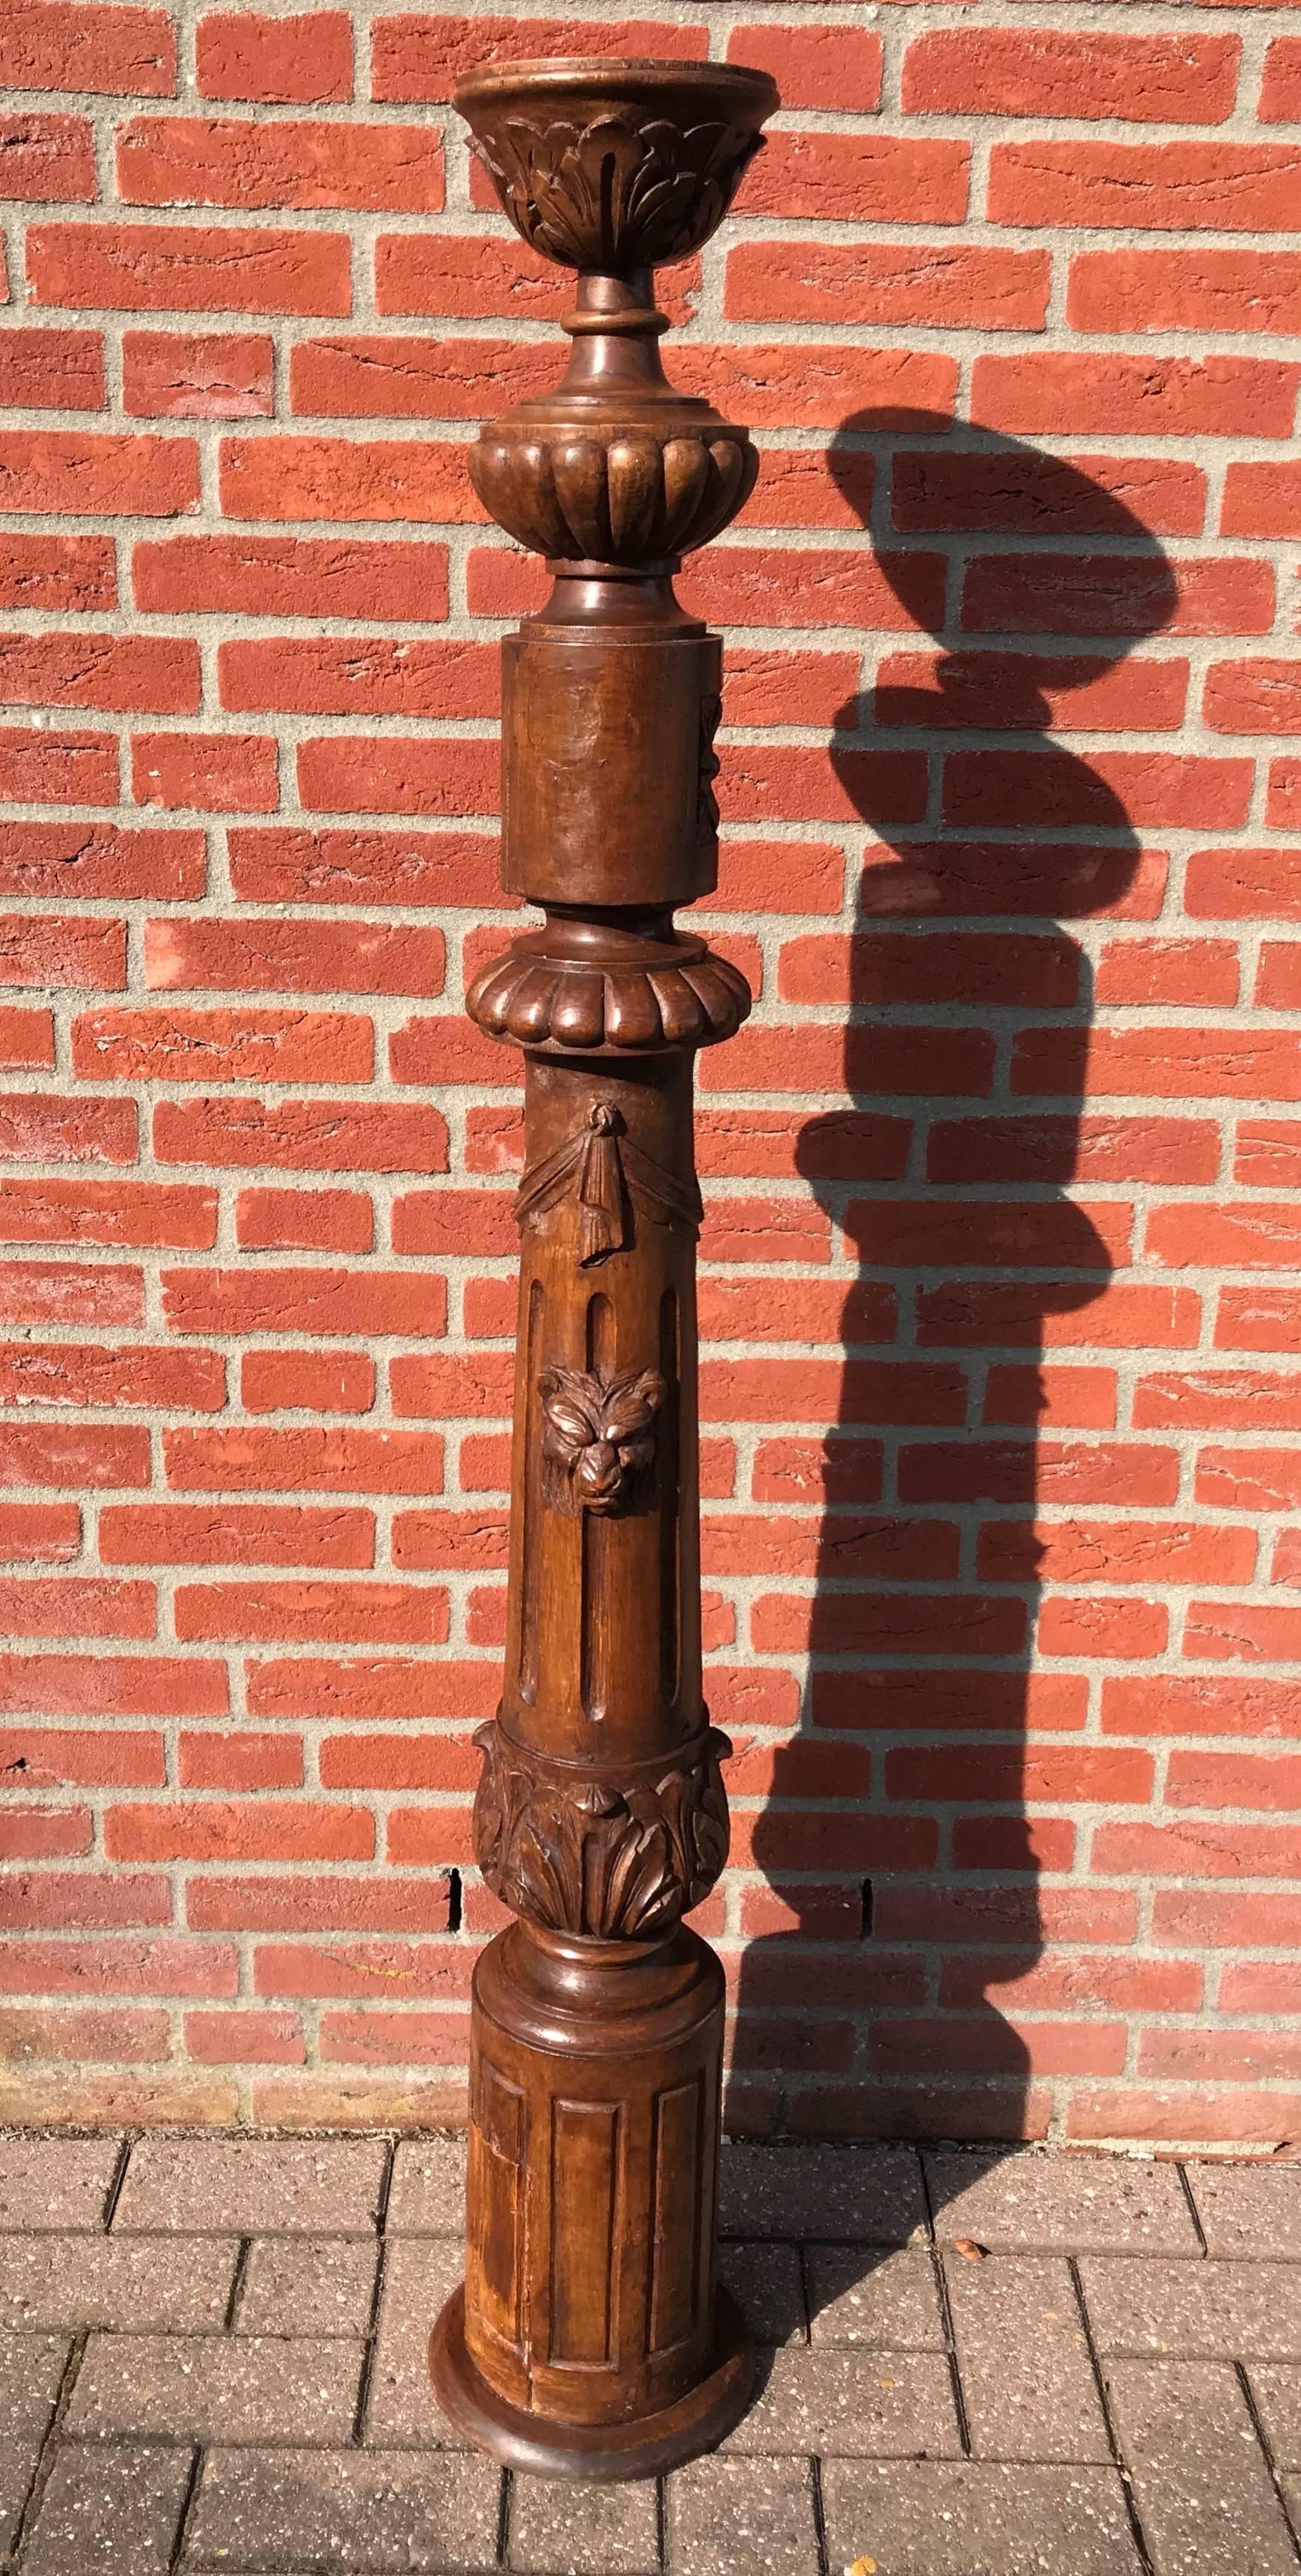 Great, sculptural stair newel post from the 1800s. 

This unique newel post and pedestal is beautifully and richly carved all around. Most impressive on this newel post are the realistic and fierce looking lion heads that are literally carved out of